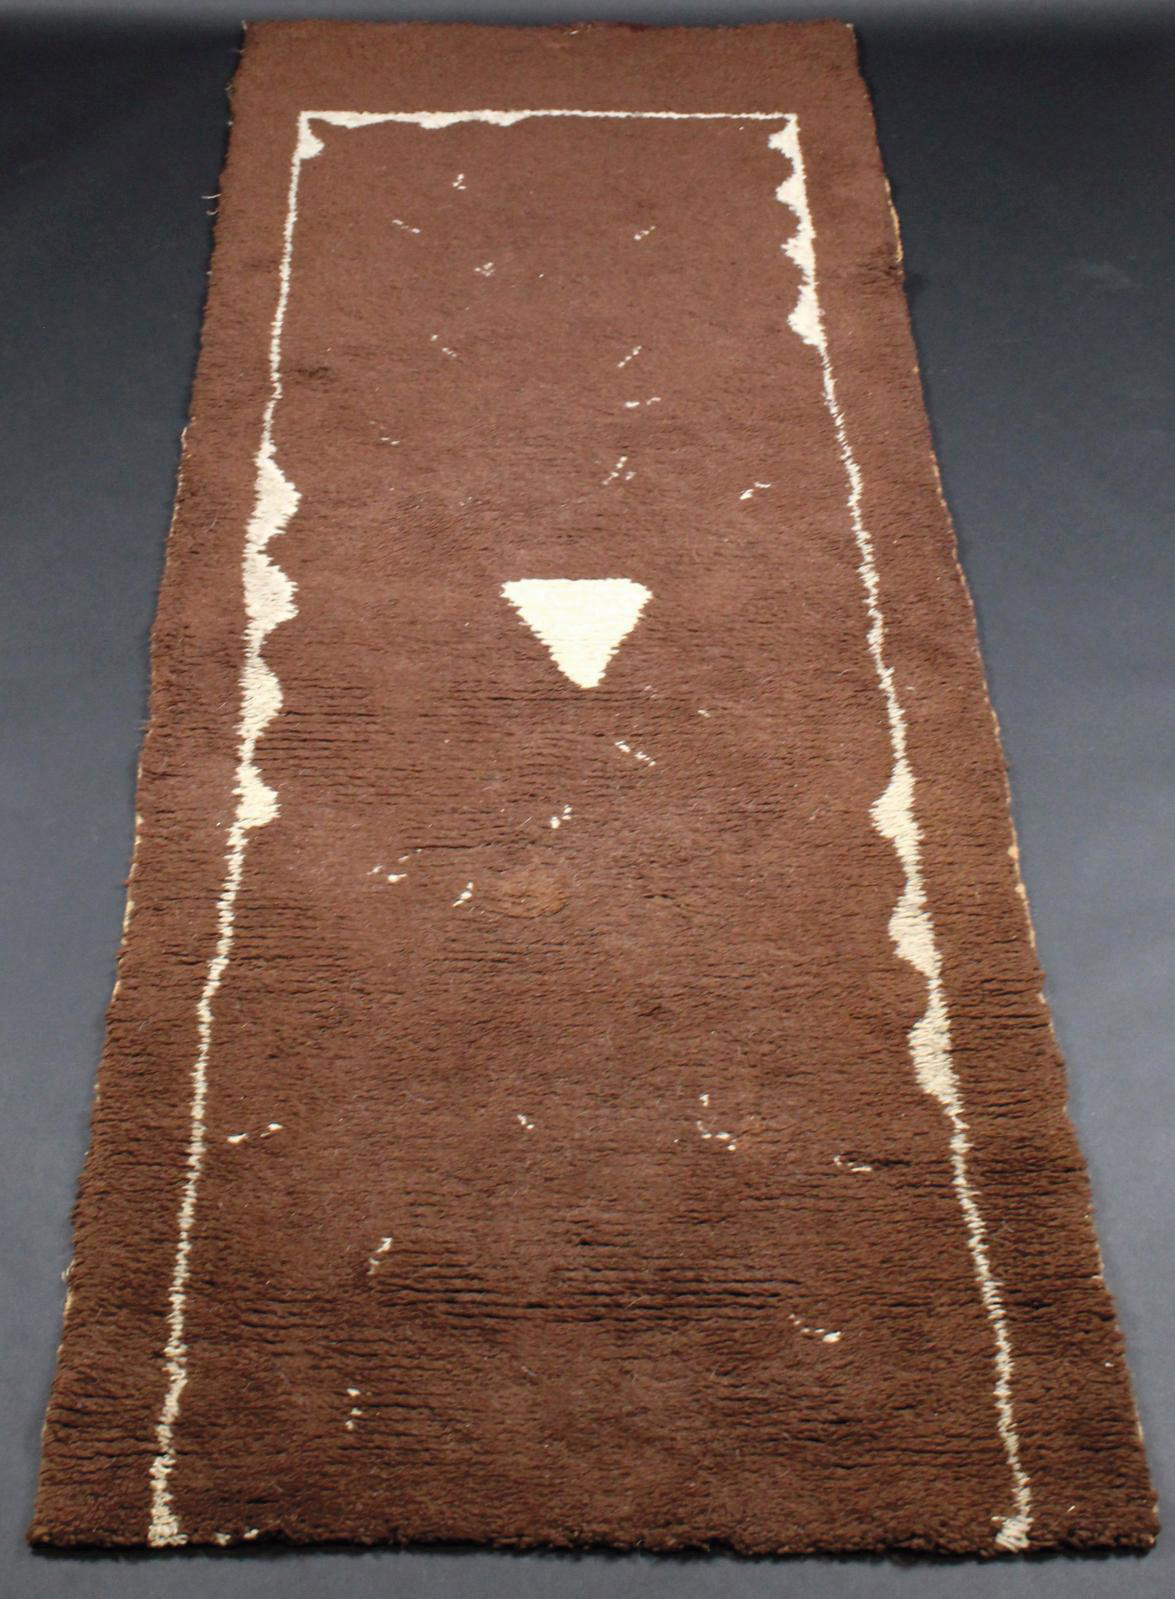 Pierre Legrain (1888–1929), brown wool carpet decorated with white geometric patterns and a triangle in the center, 276 x 100 cm/108.66 x 